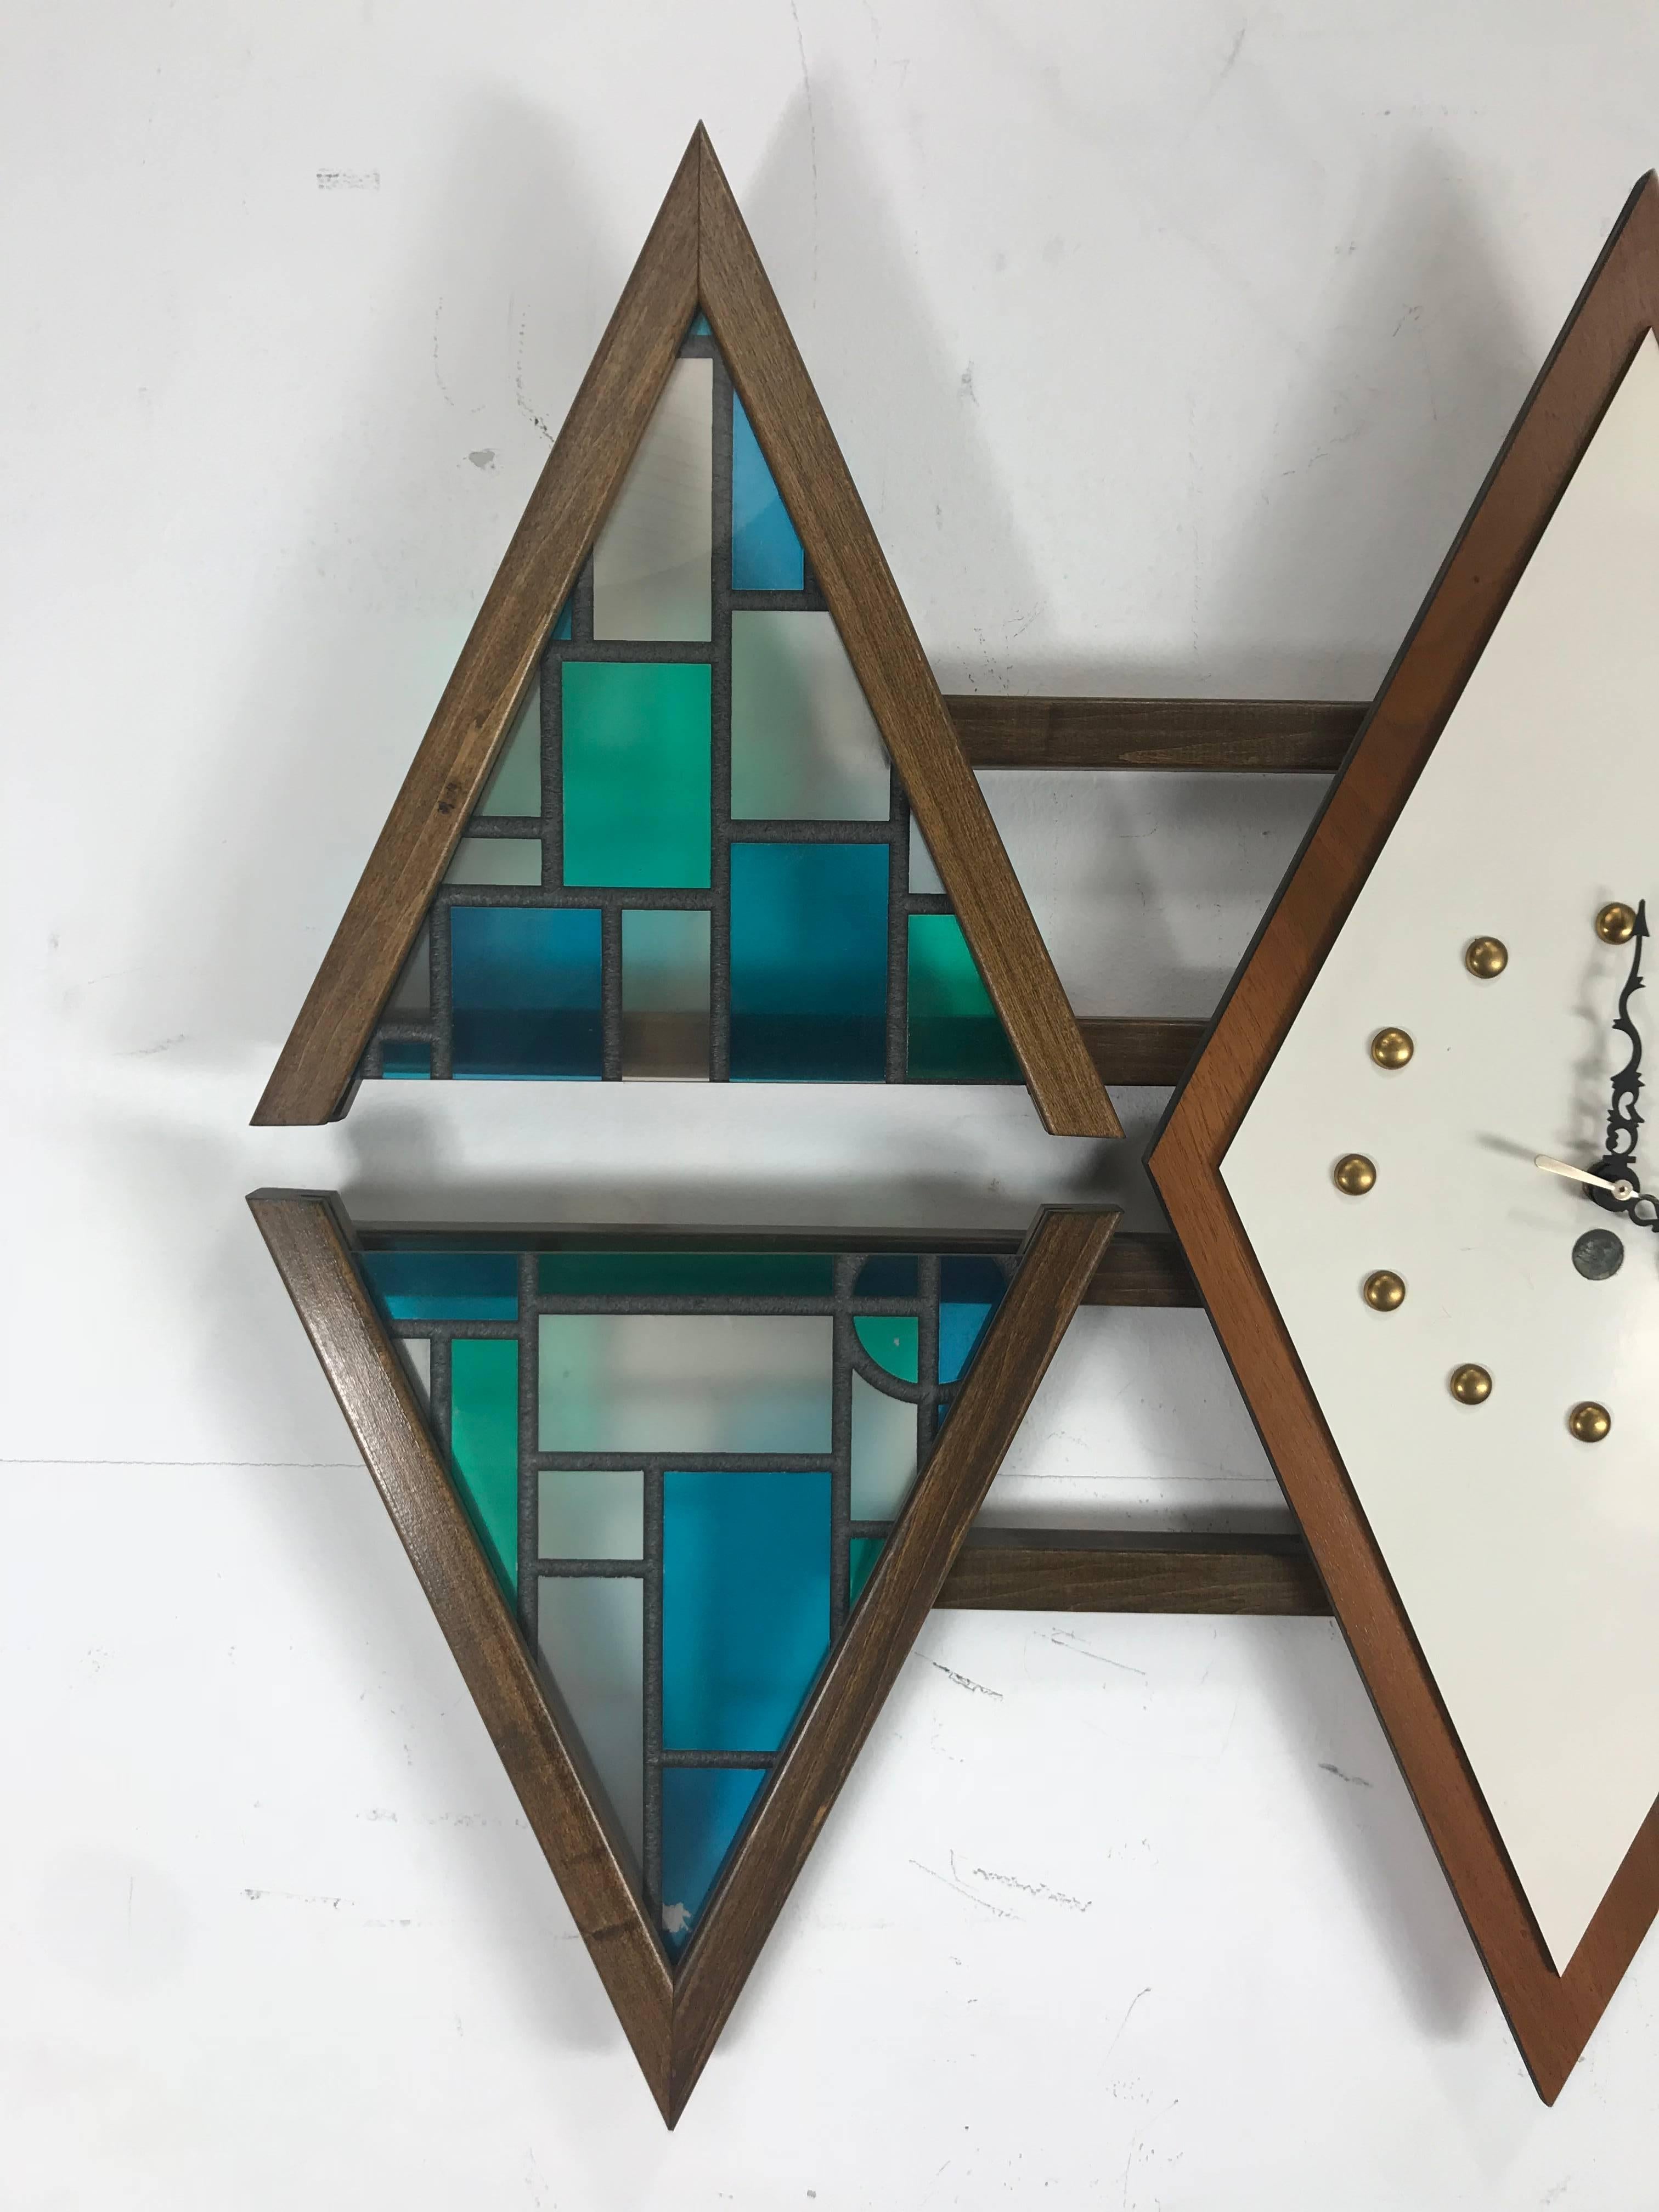 Unusual Mid-Century wall clock made by Penthouse Art Creations, triple diamond design, tinted plastic inserts to mimic stained glass, battery operated, tested and keeping perfect time.